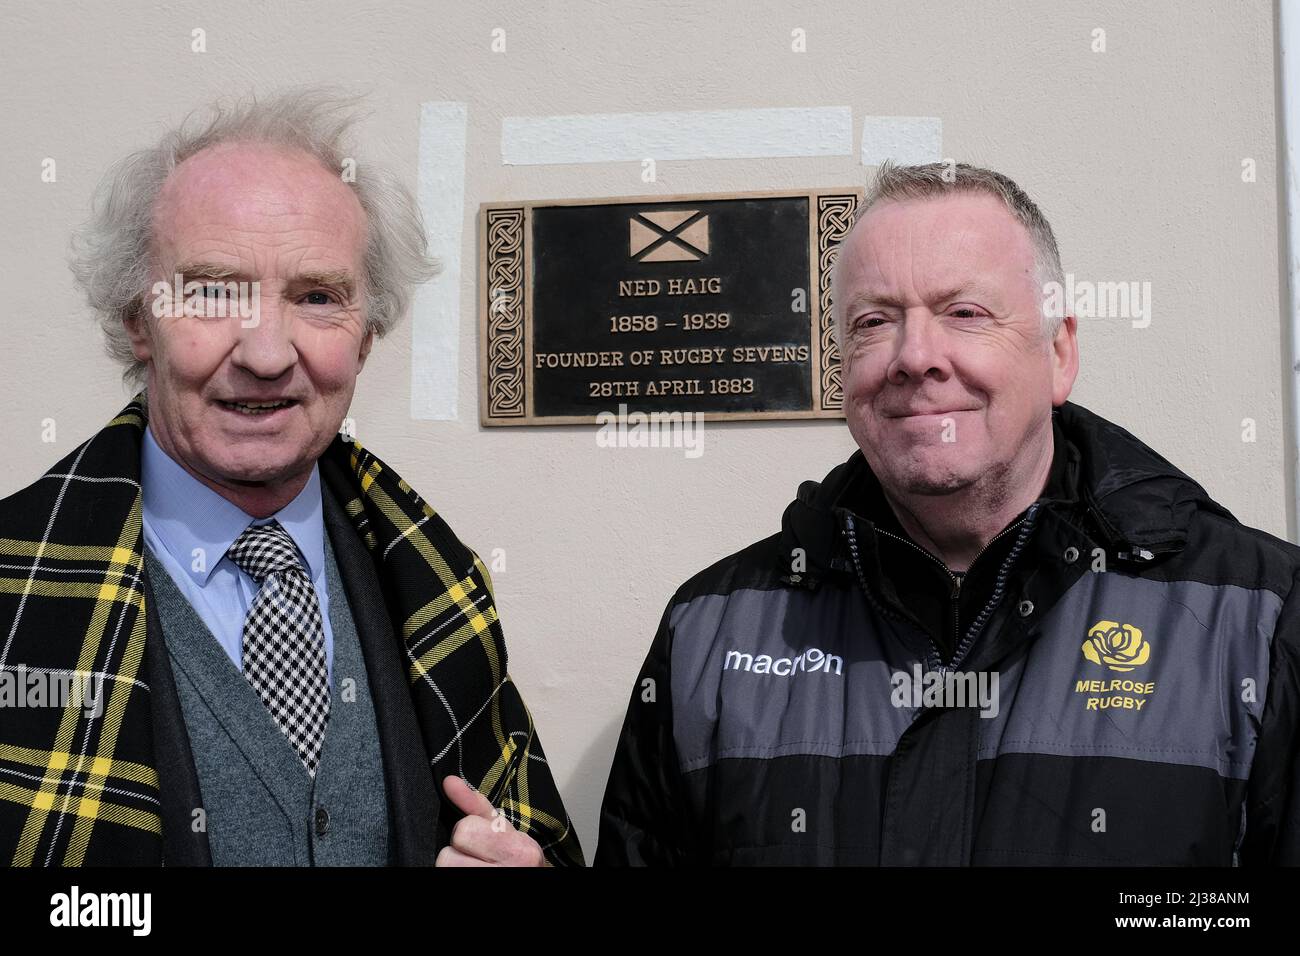 Melrose, UK, Wednesday 06 April 2022 His Grace The Duke of Buccleuch and Queensberry KT KBE CVO DL FSA FRSE FRSGS unveils a plaque. Alongside Douglas Brown, President, Melrose RFC. Melrose Rugby Ltd is delighted to confirm that Ned Haig, the founder of Rugby Sevens, has been recognised by Historic Environment Scotland (HES) in their latest Commemorative Plaque scheme. The national scheme, which has been running since 2012, celebrates noteworthy individuals from Scottish public life, as nominated by the public, by erecting plaques on buildings with strong links to their life or work. The new Stock Photo